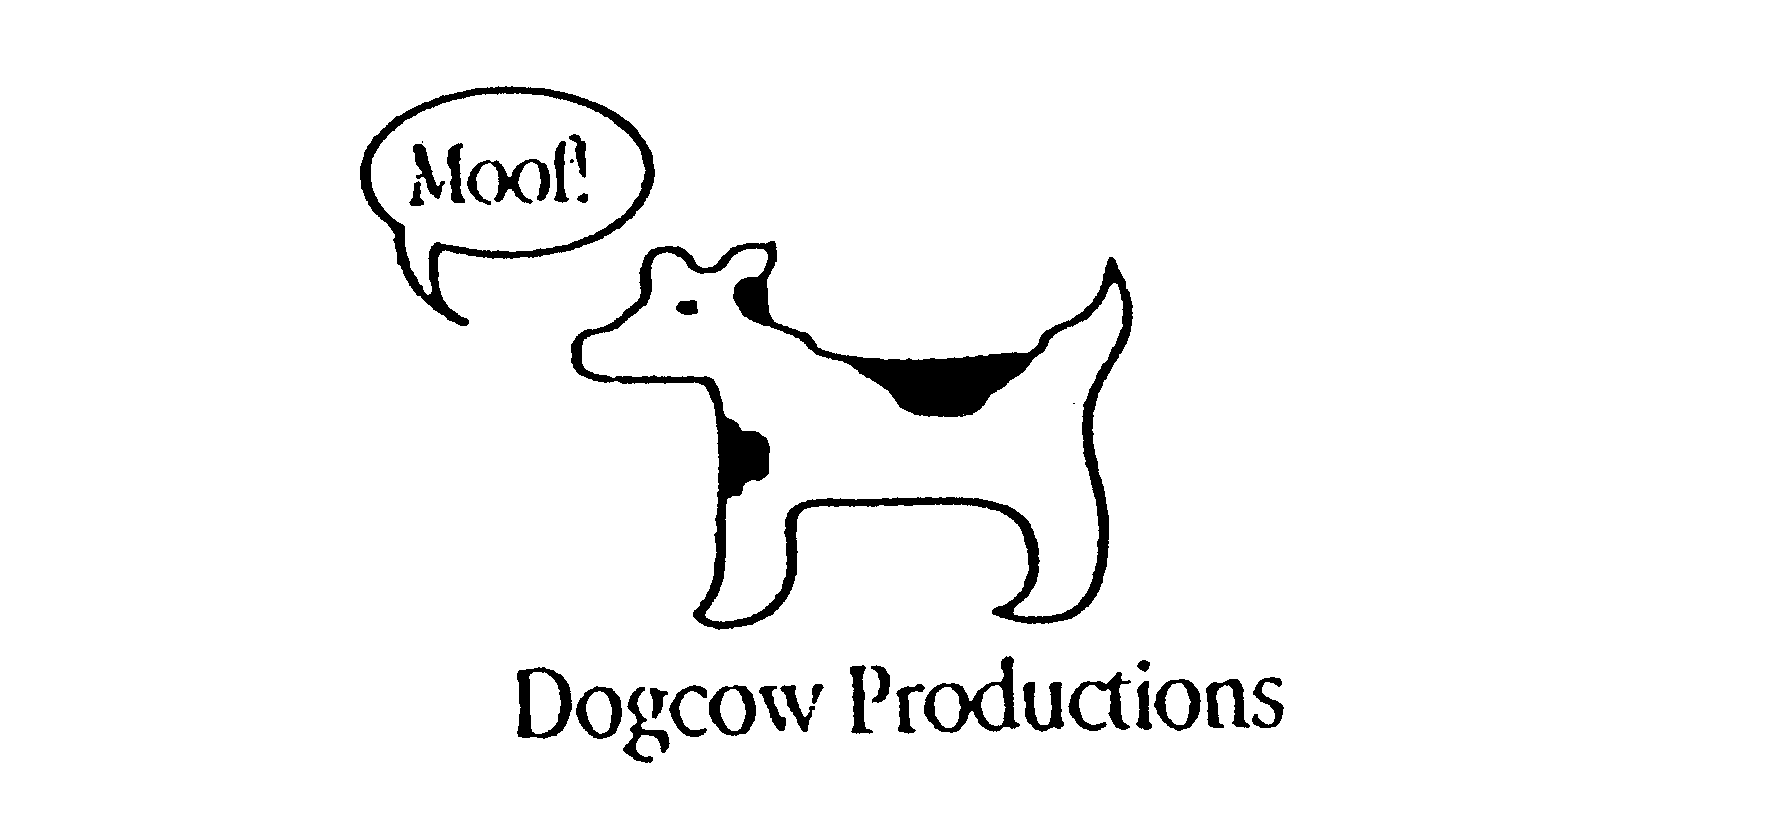  MOOF! DOGCOW PRODUCTIONS